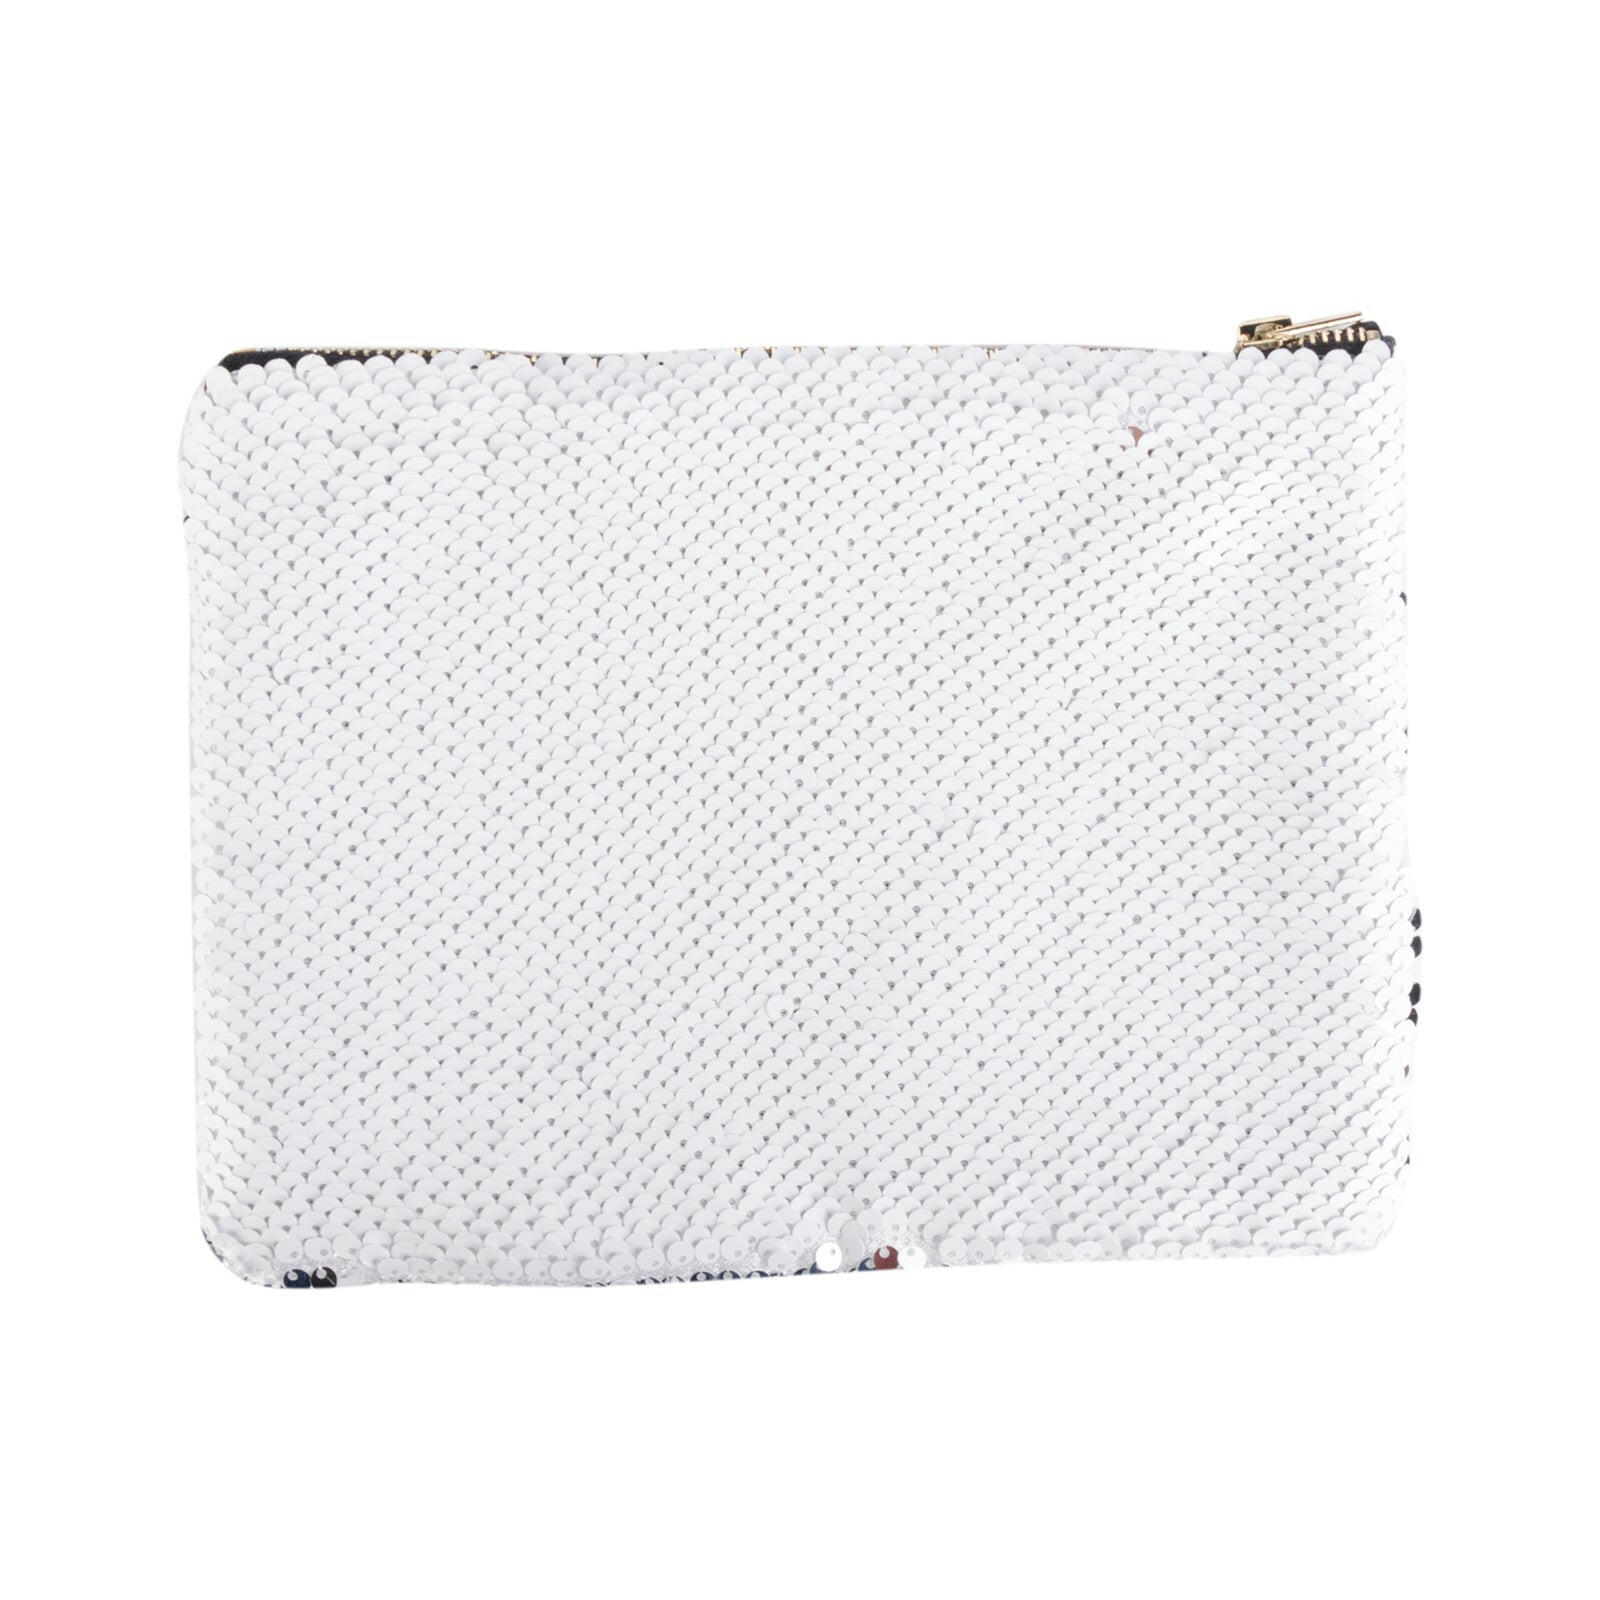 Sequin Sublimation Cosmetic Bag - 4 Pack.